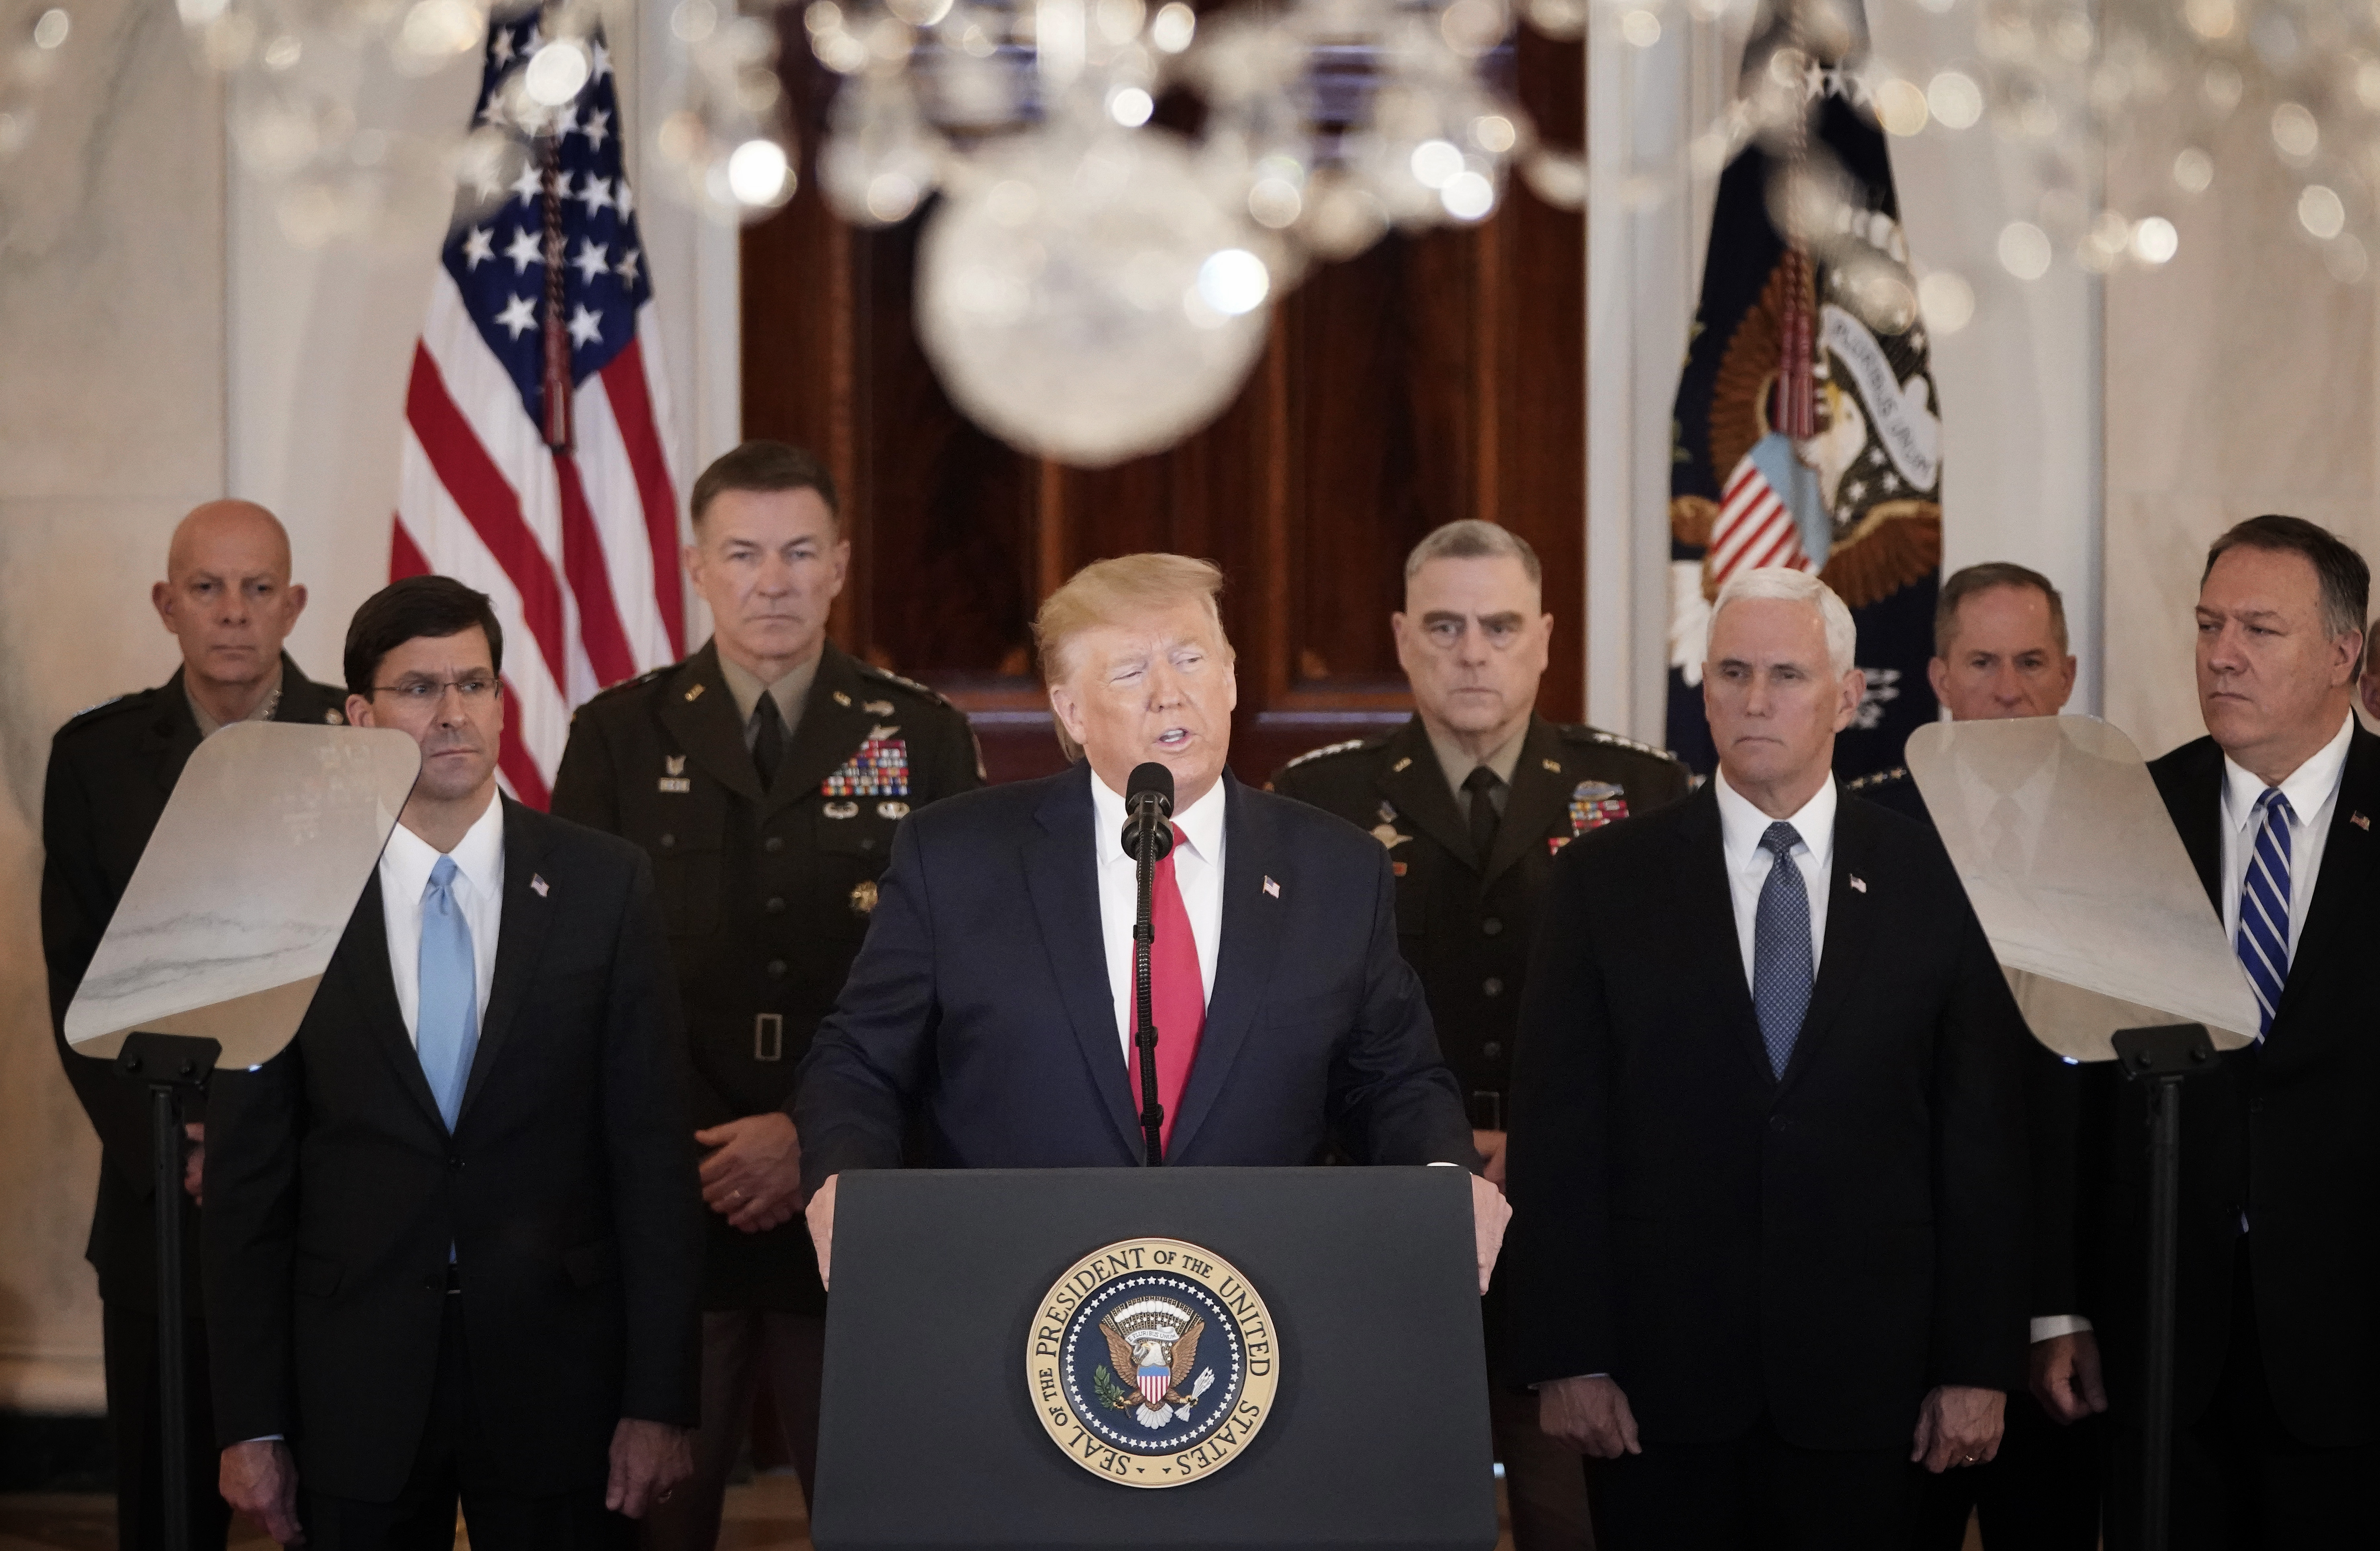 WASHINGTON, DC - JANUARY 08: U.S. President Donald Trump speaks from the White House on January 08, 2020 in Washington, DC. During his remarks, Trump addressed the Iranian missile attacks tha